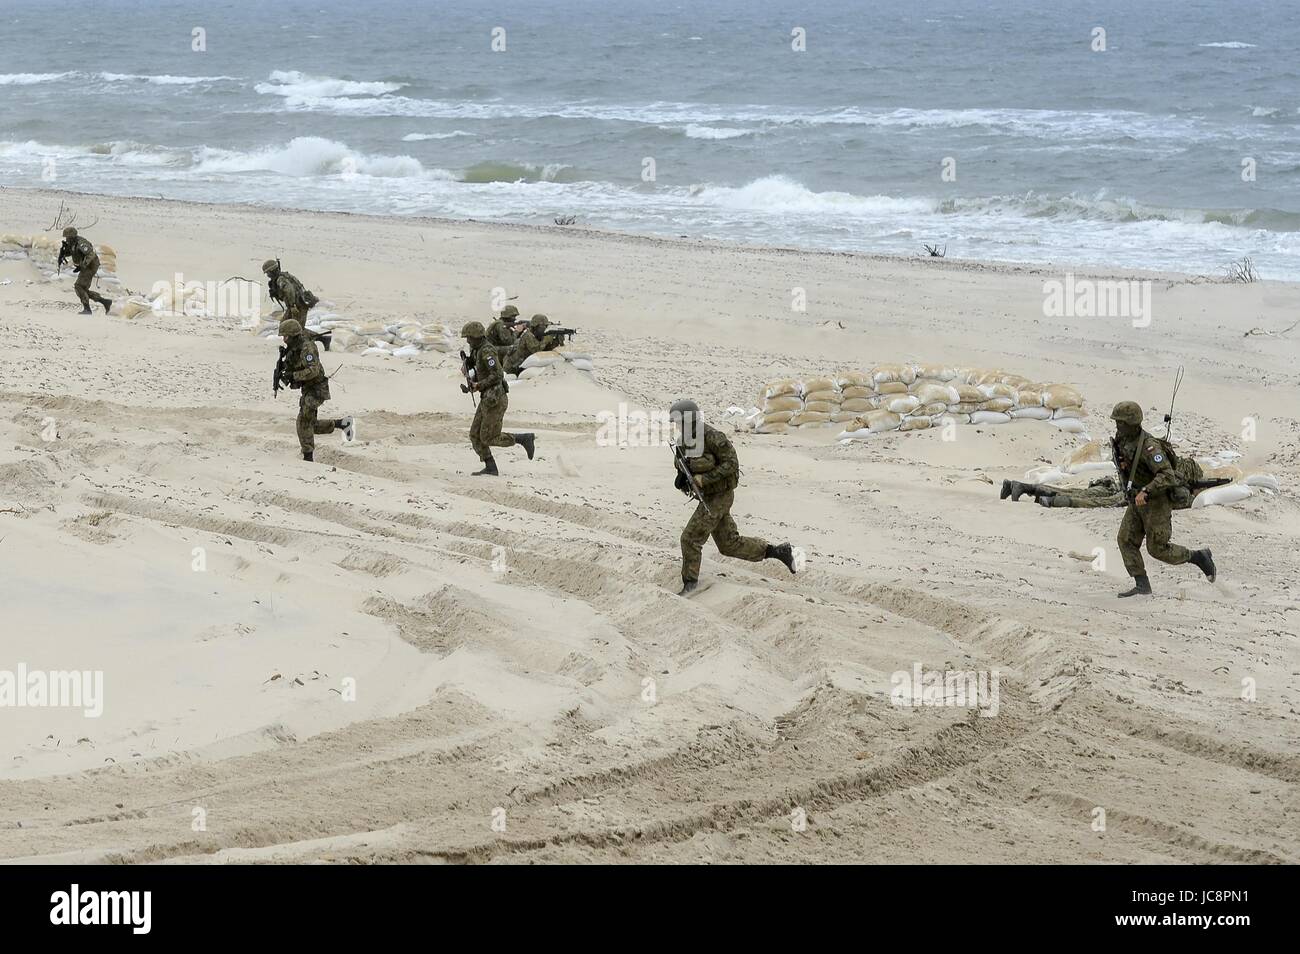 Ustka, Poland. 14th June, 2017. Poland is hosting 40 ships from 14 nations for this year’s edition of the international Baltic Sea exercise BALTOPS 17.  The annual maritime exercise take place on June 14, 2017 in Ustka, Poland. Credit: East News sp. z o.o./Alamy Live News Stock Photo